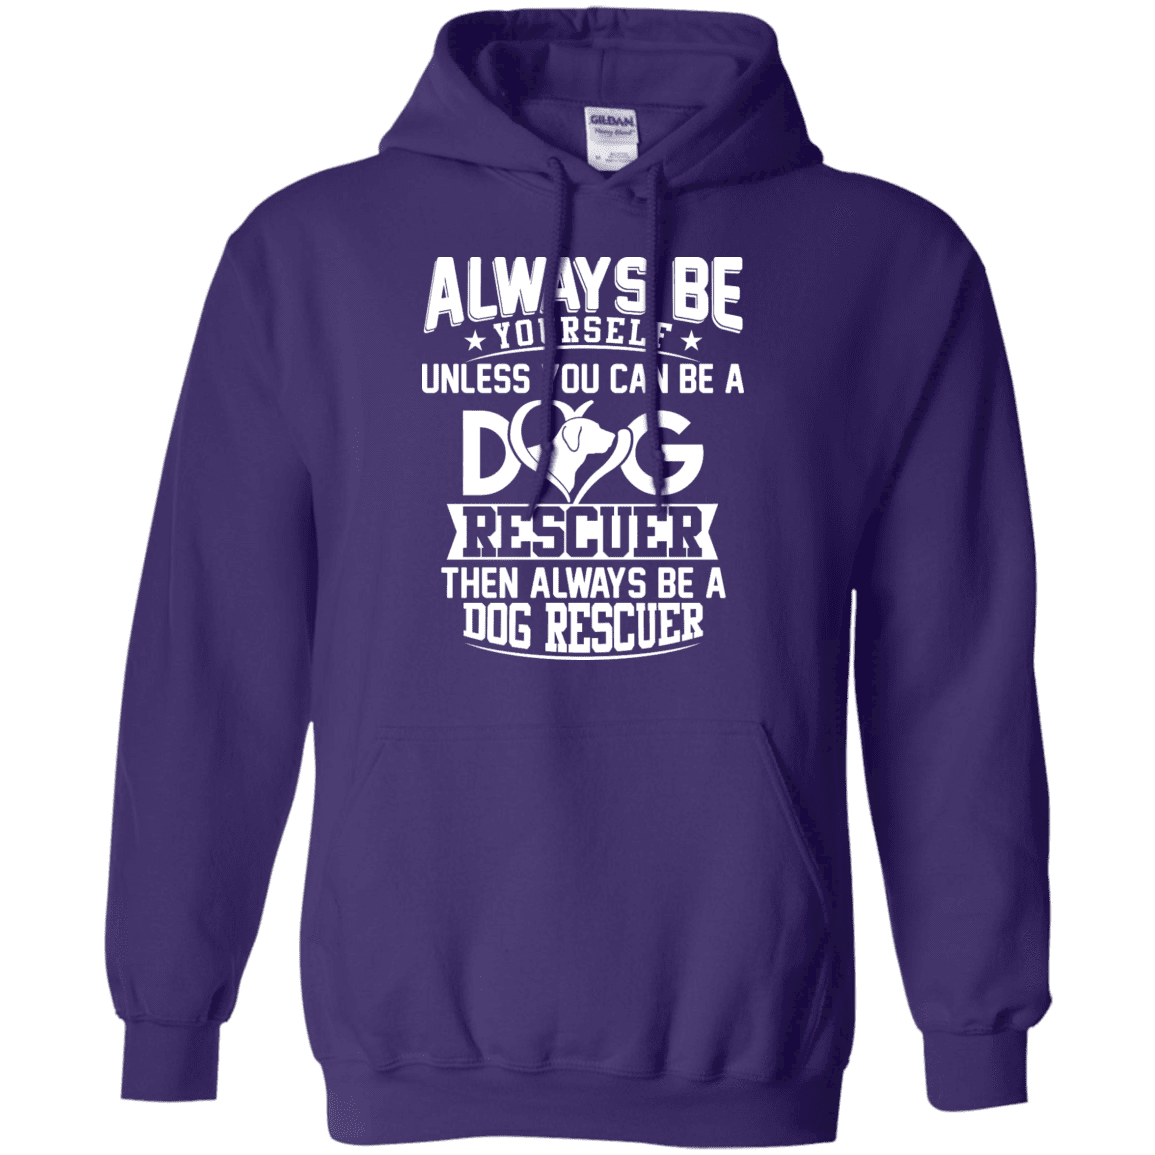 Always Be A Dog Rescuer - Hoodie.